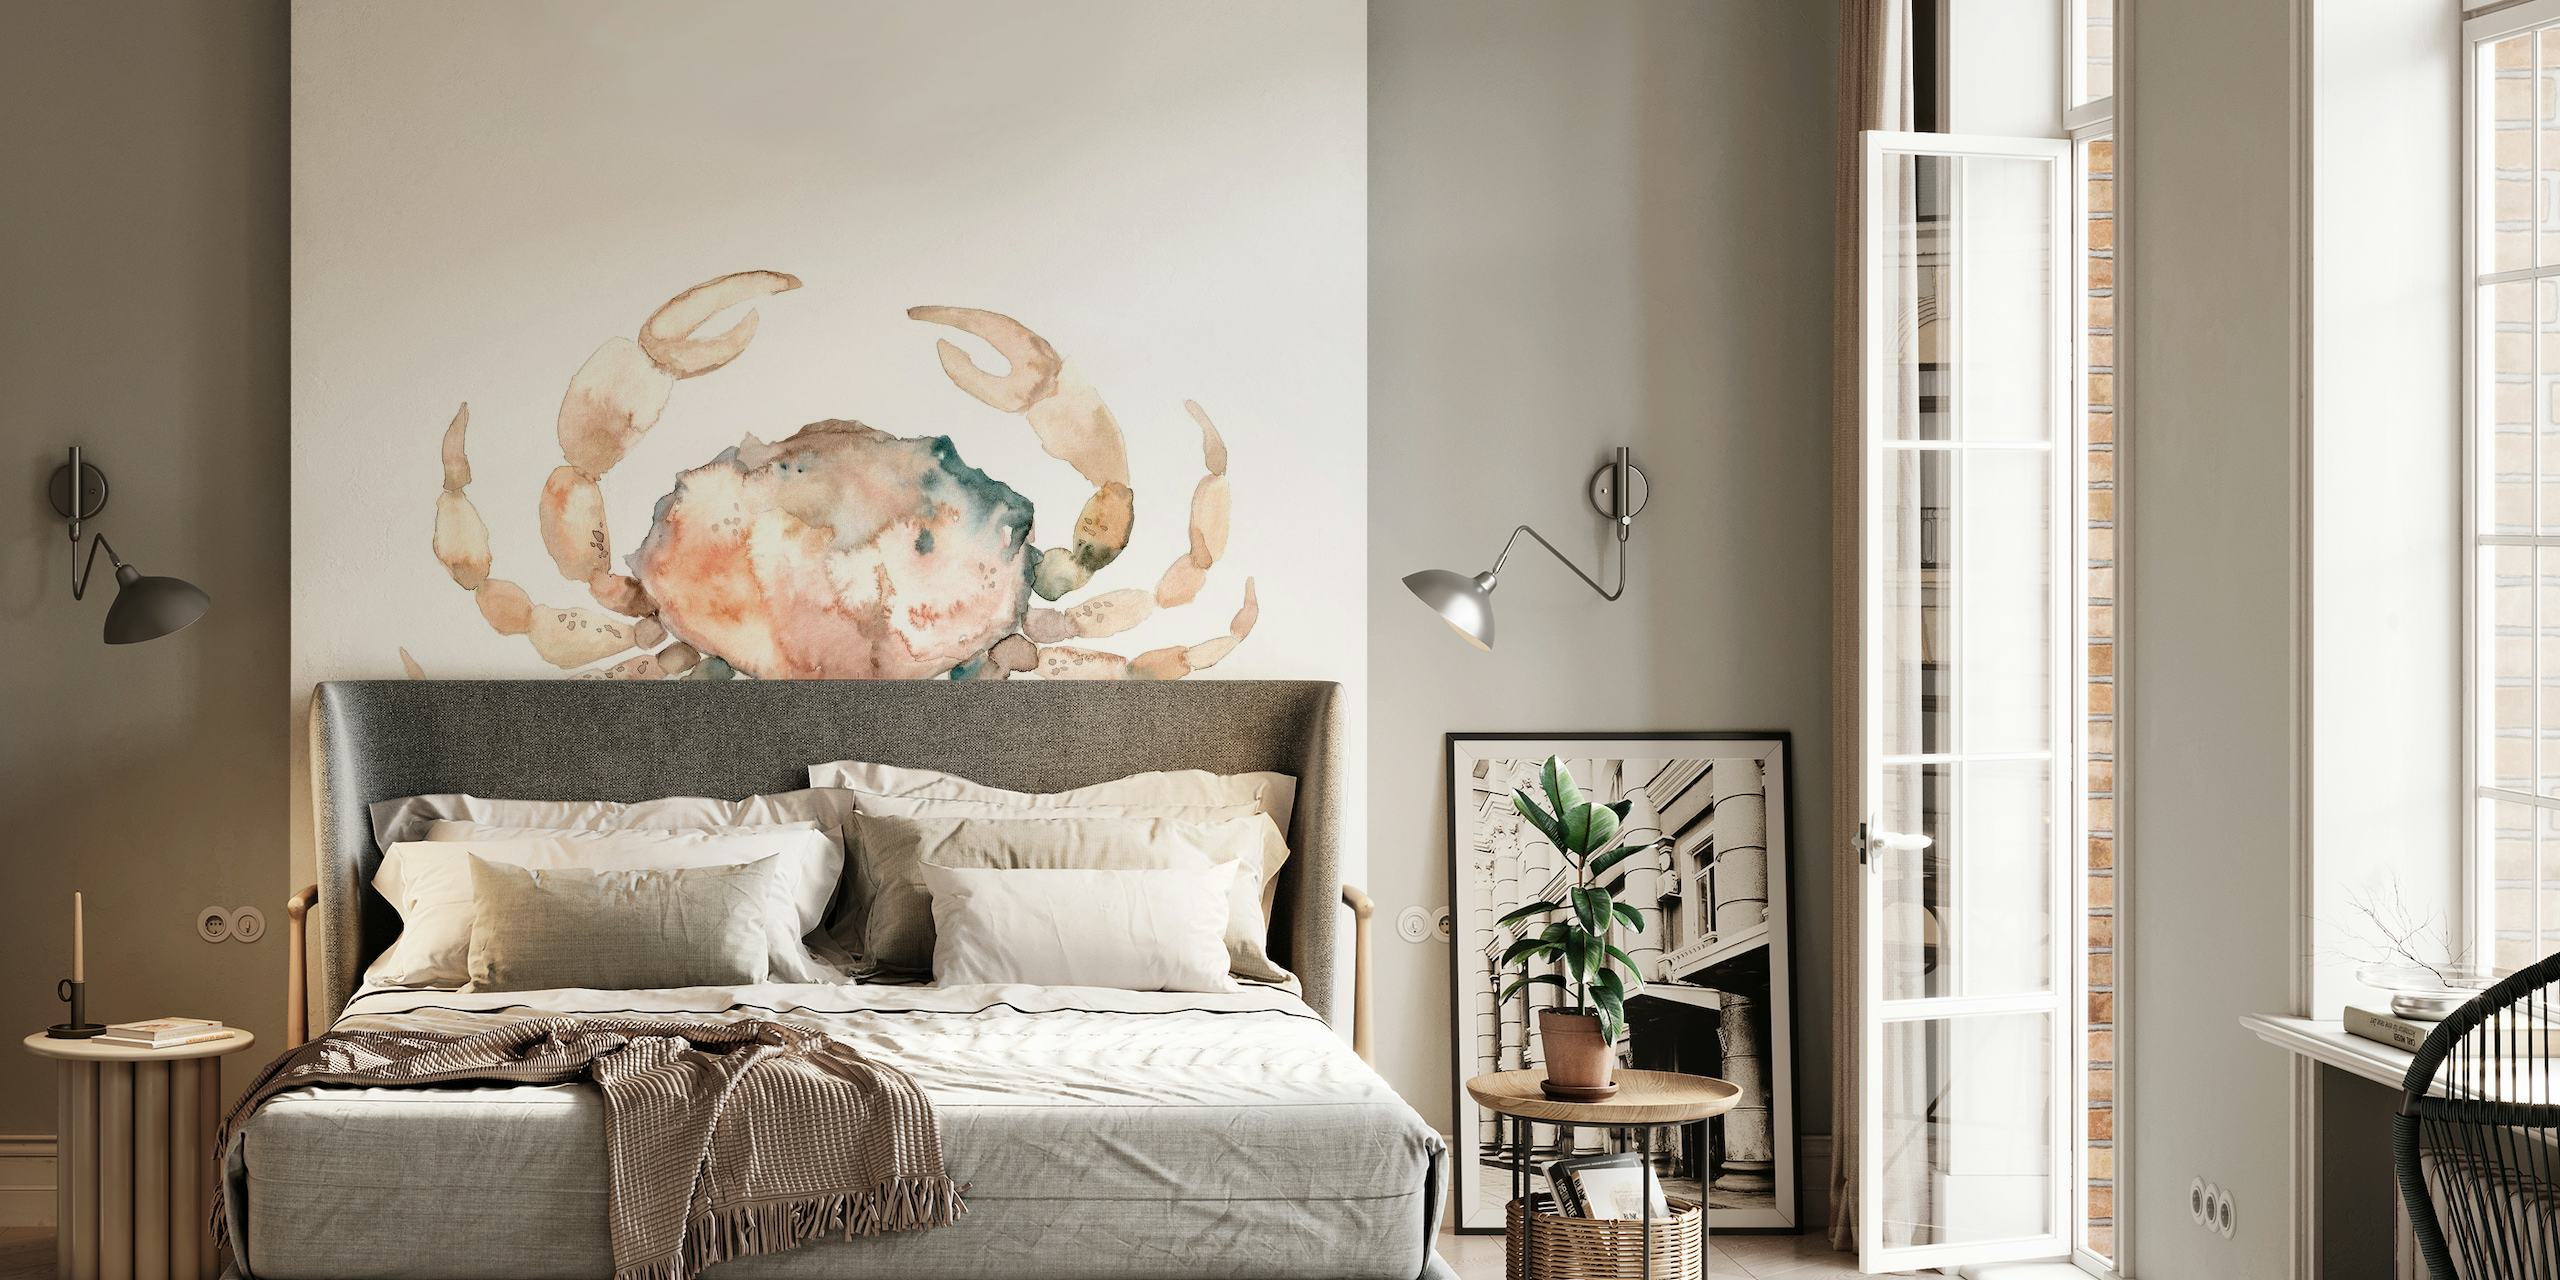 Watercolor mural featuring a group of crabs in soothing tones for wall decoration